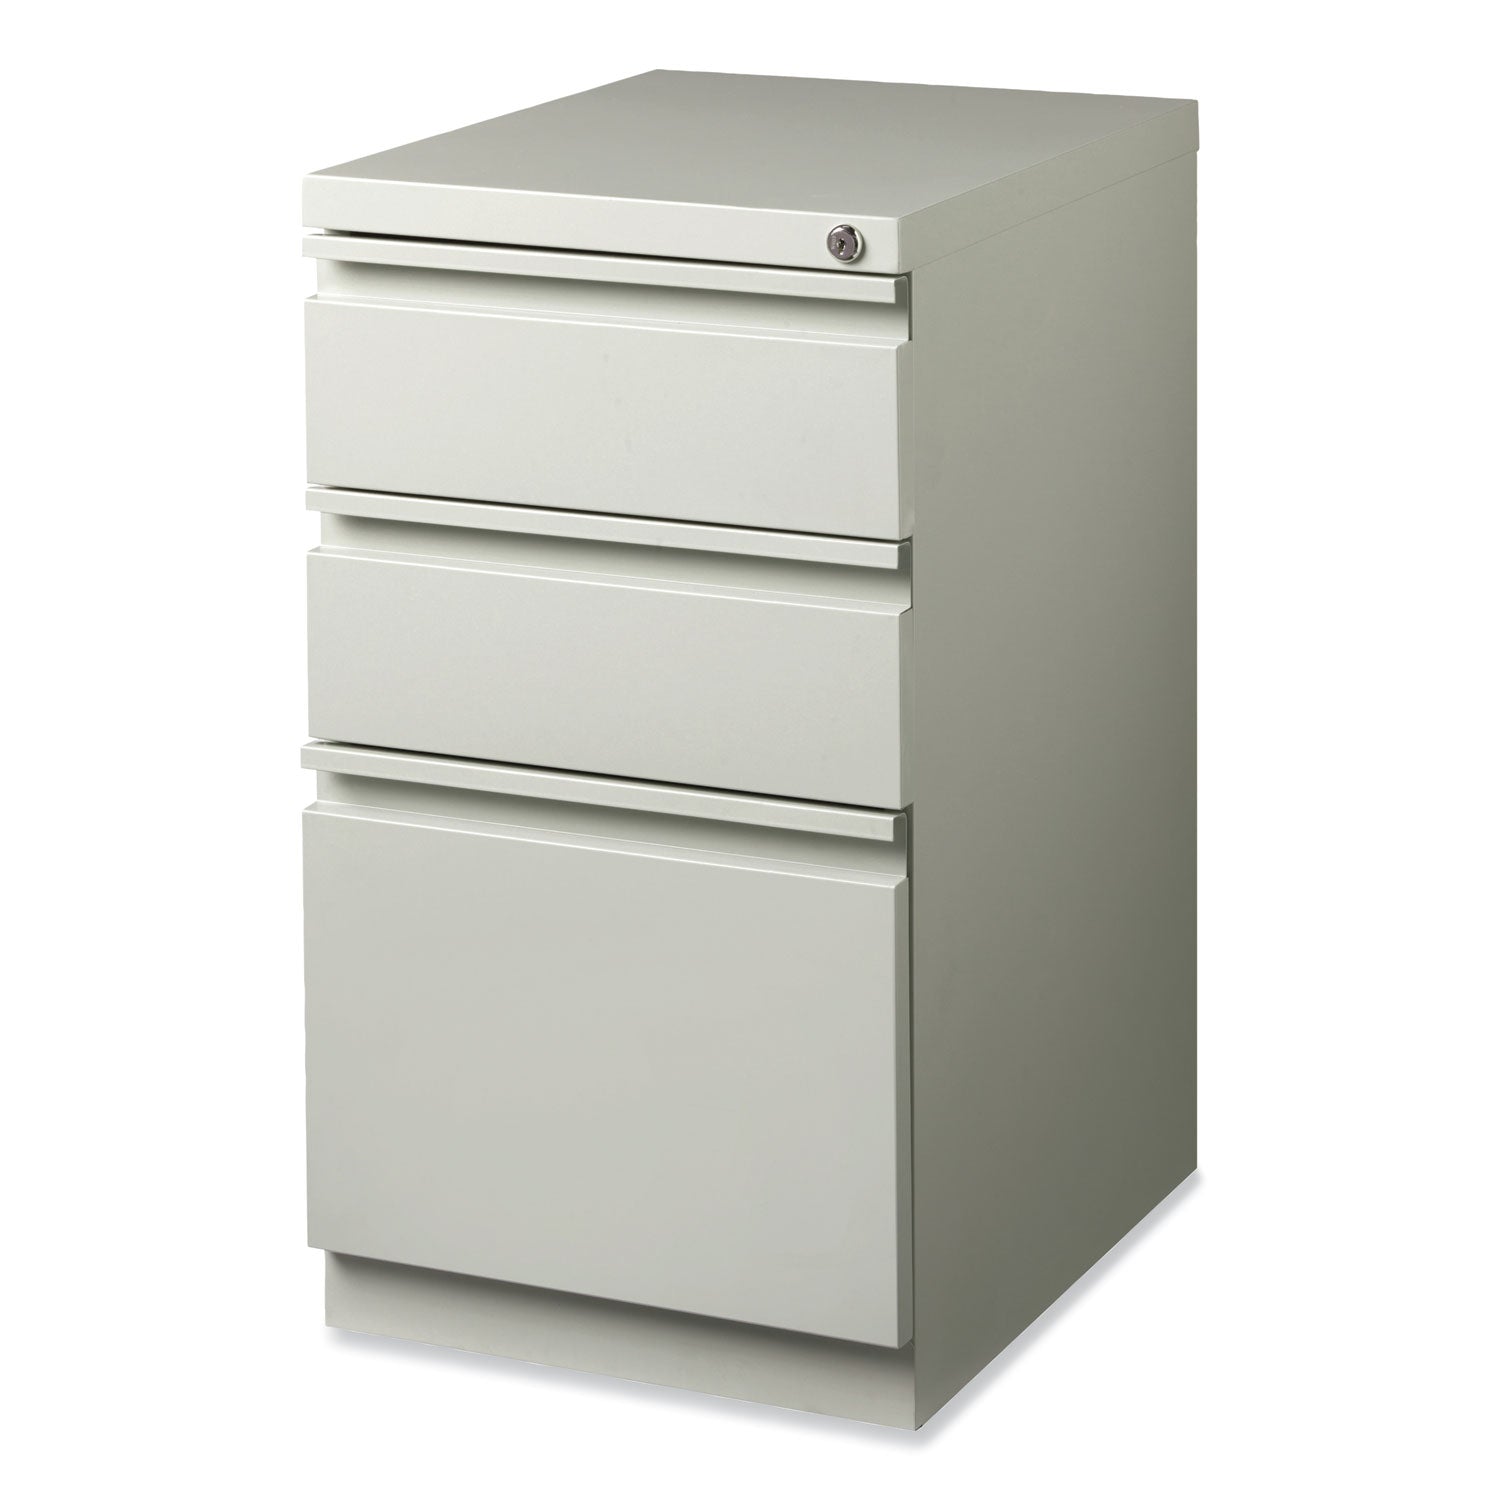 full-width-pull-20-deep-mobile-pedestal-file-box-box-file-letter-lt-gray-15-x-1988-x-2775-ships-in-4-6-business-days_hid18576 - 1